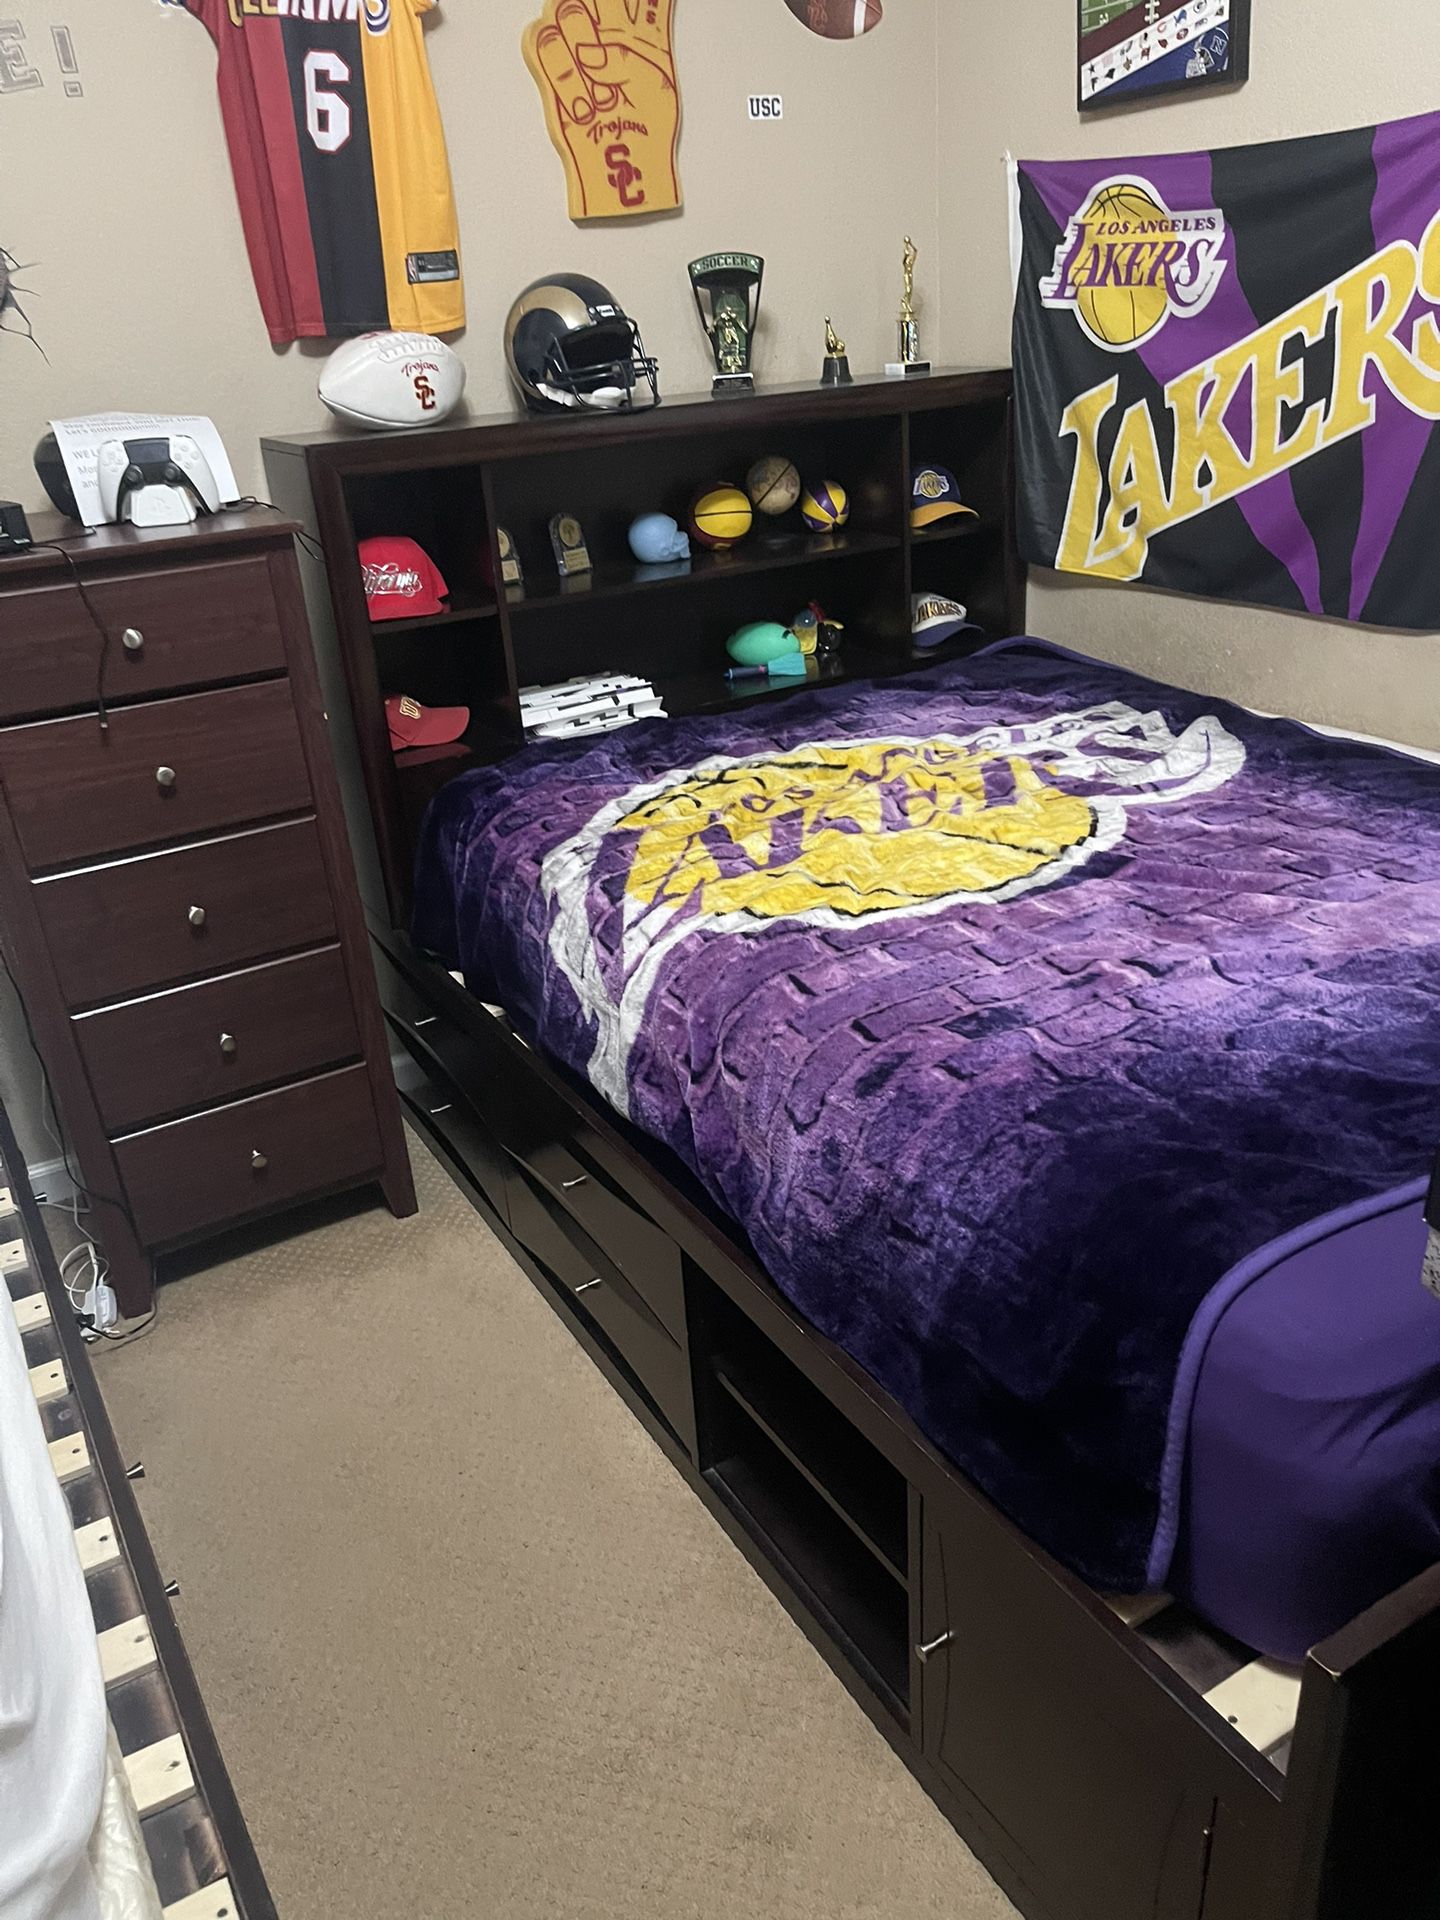 $300 - Bed with underneath storage and backboard with shelves - heavy duty